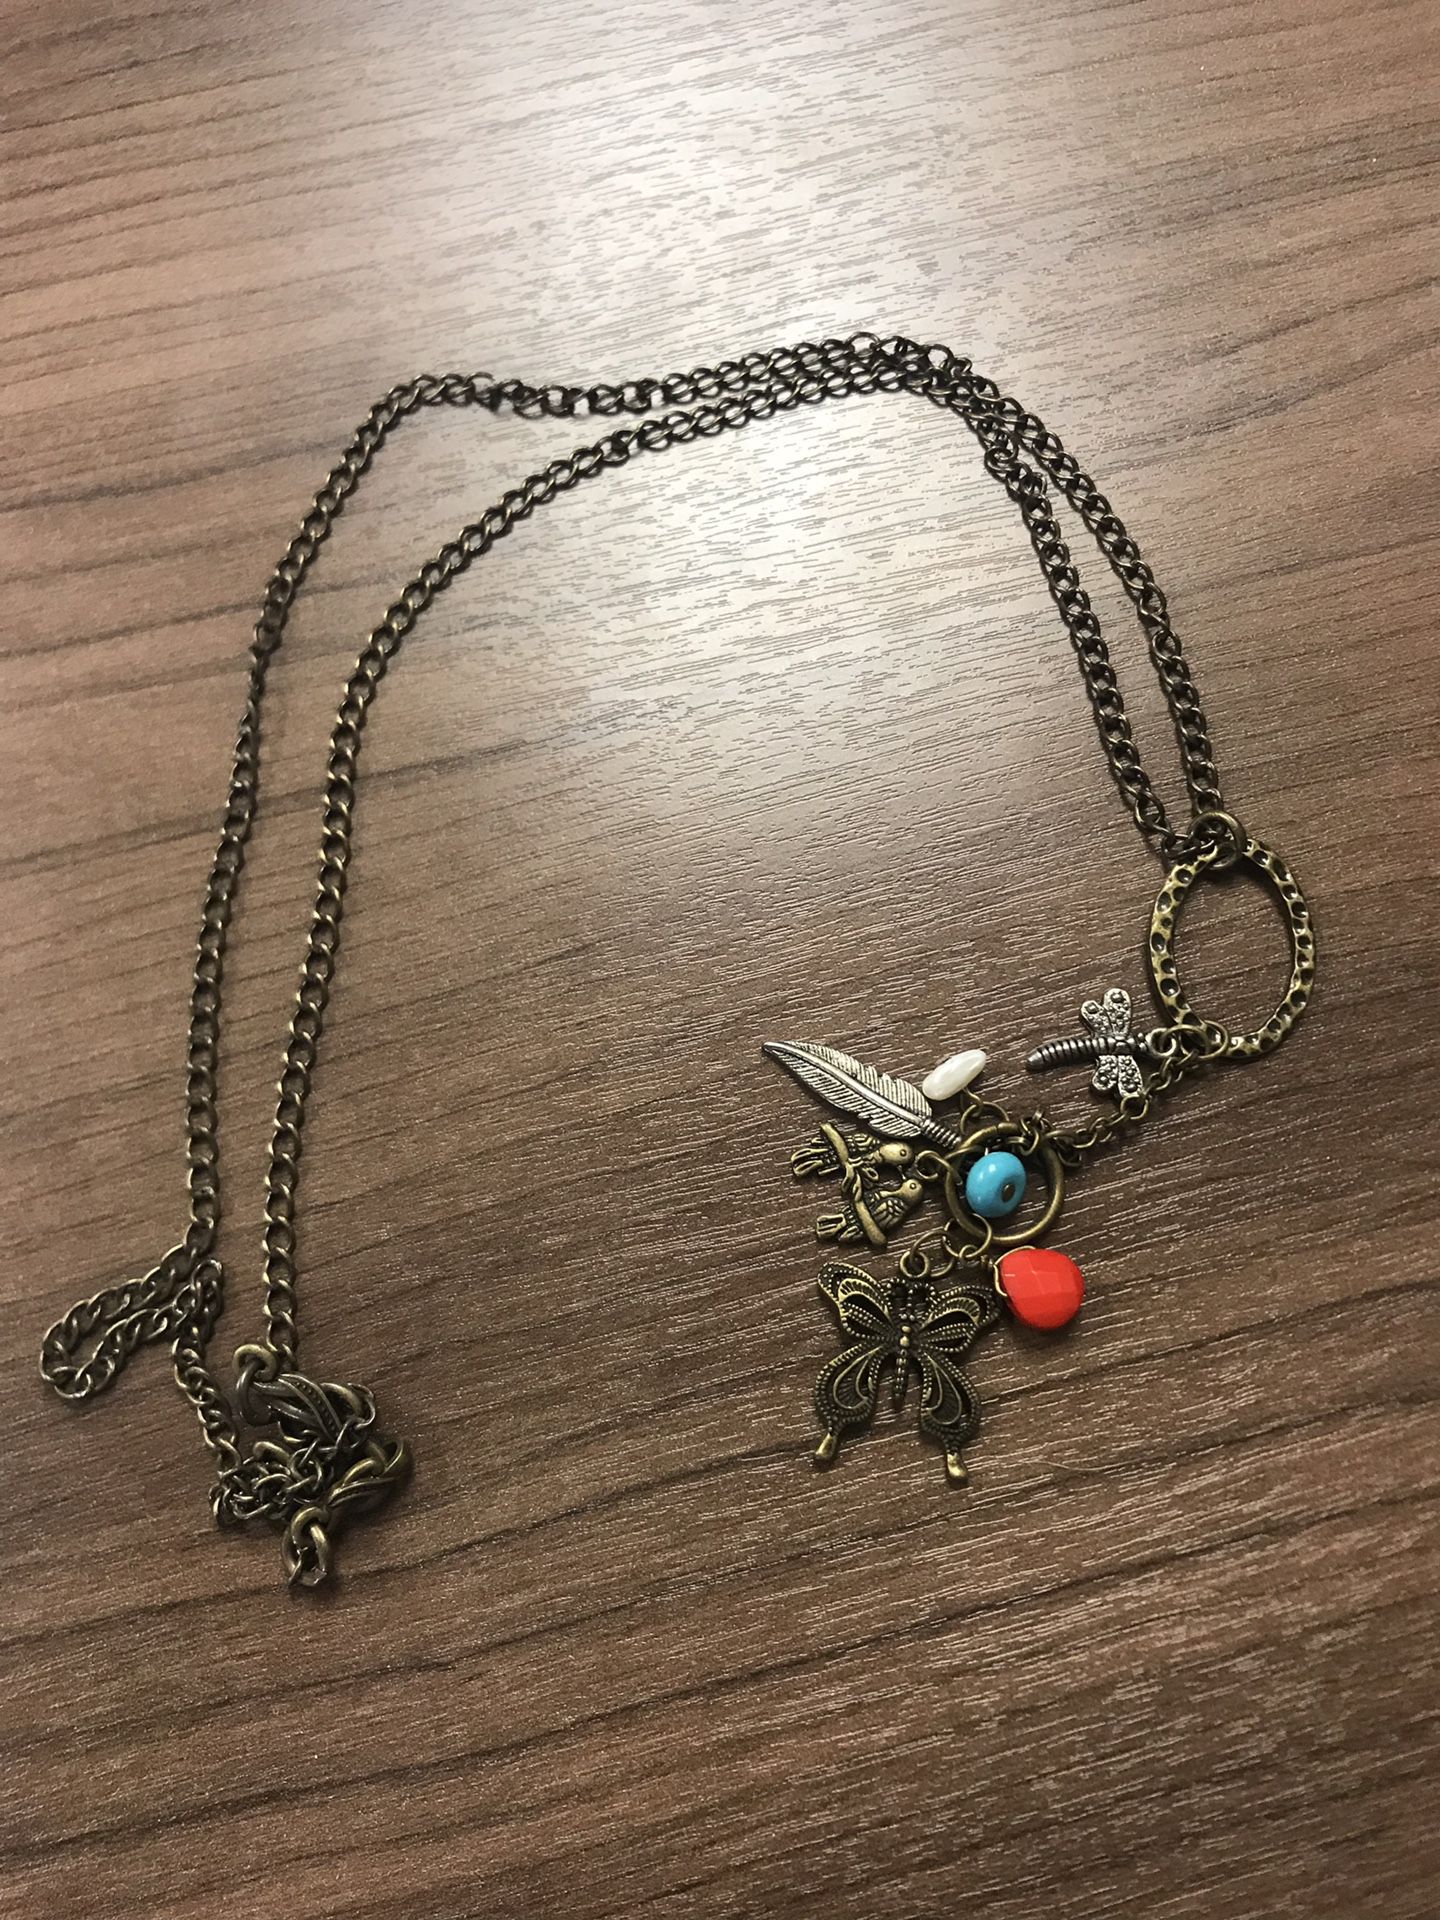 Handmade necklace with butterfly and feather